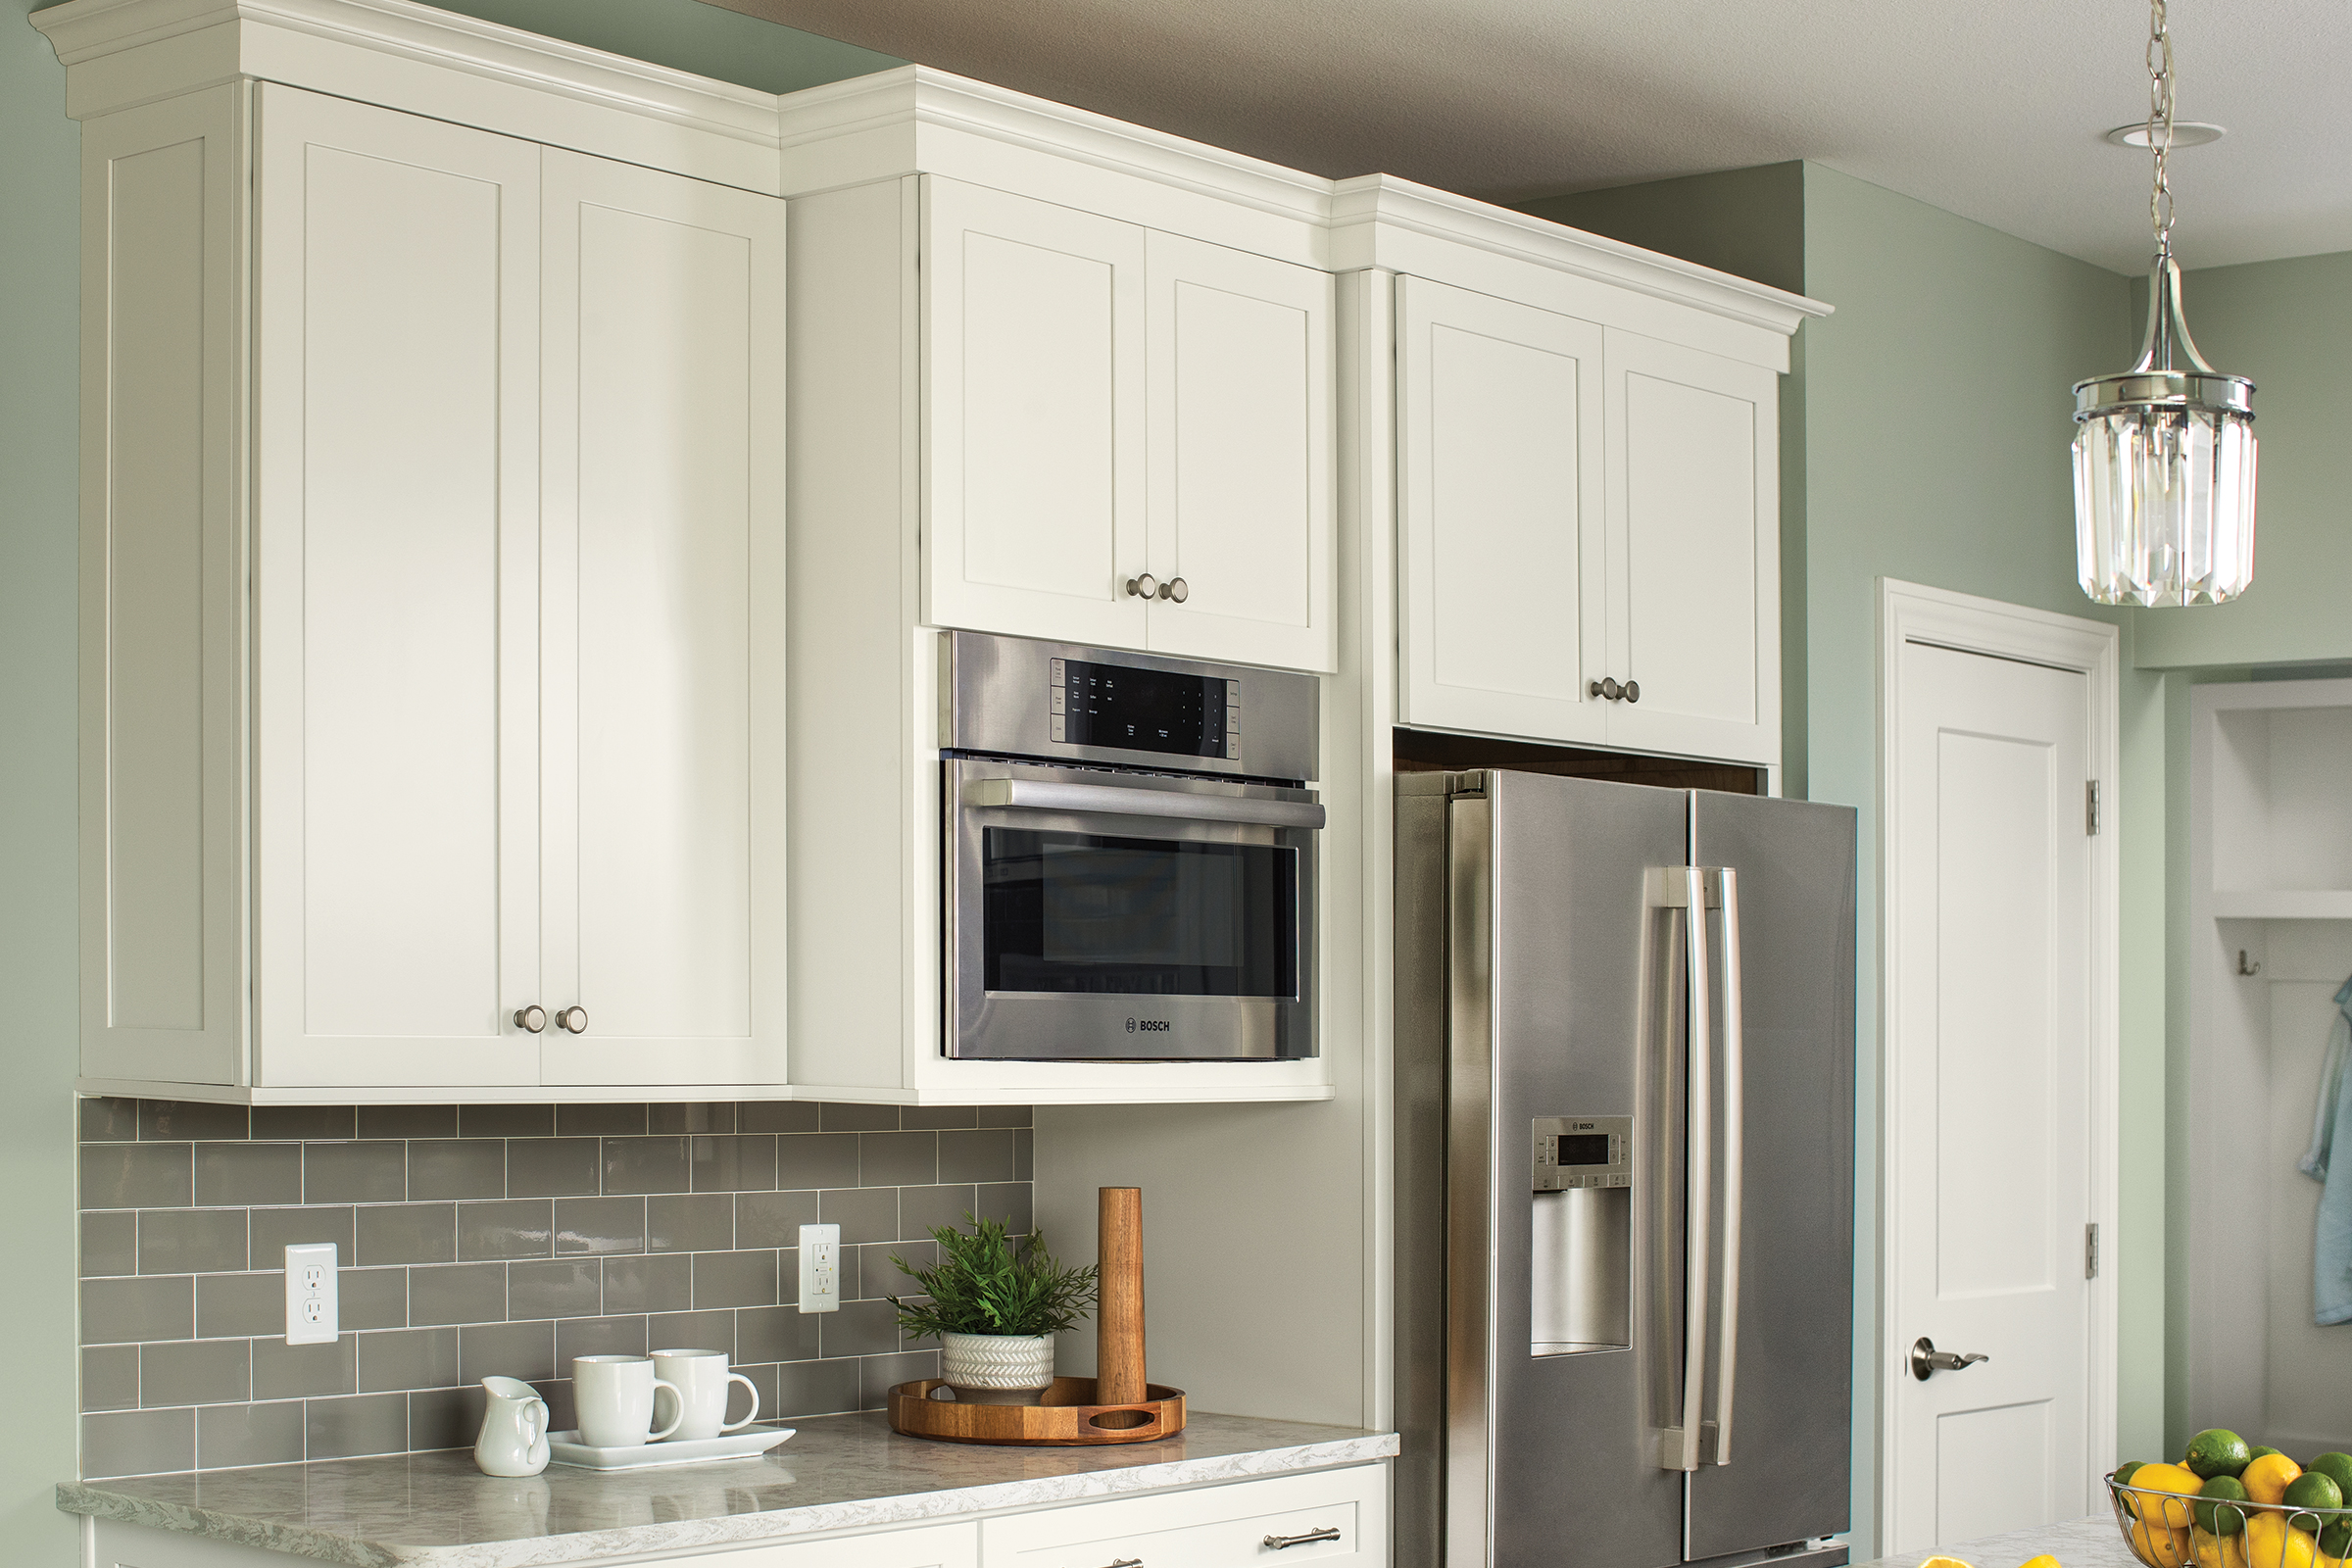 Shaker-style KraftMaid standard kitchen wall cabinets in Dove White finish